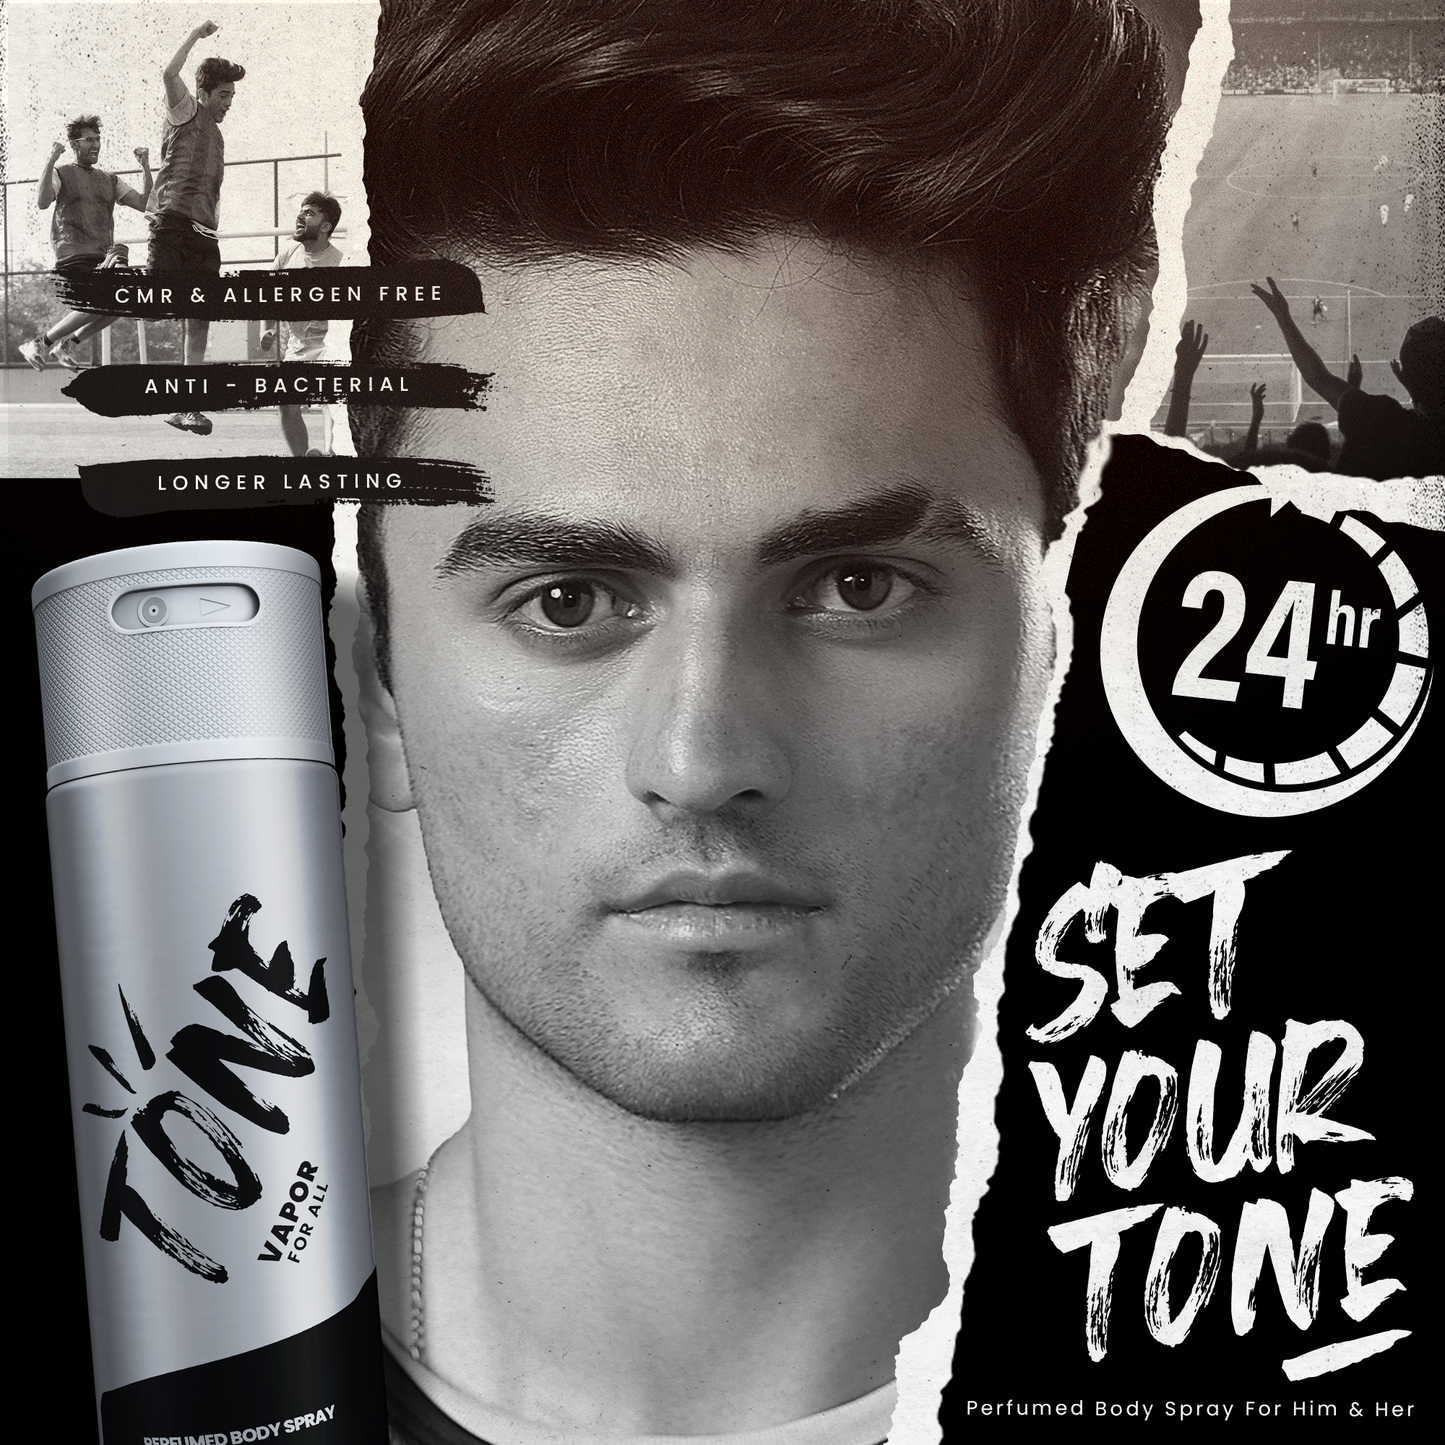 Tone Vapor For All - Bold and warm fragrance for everyone